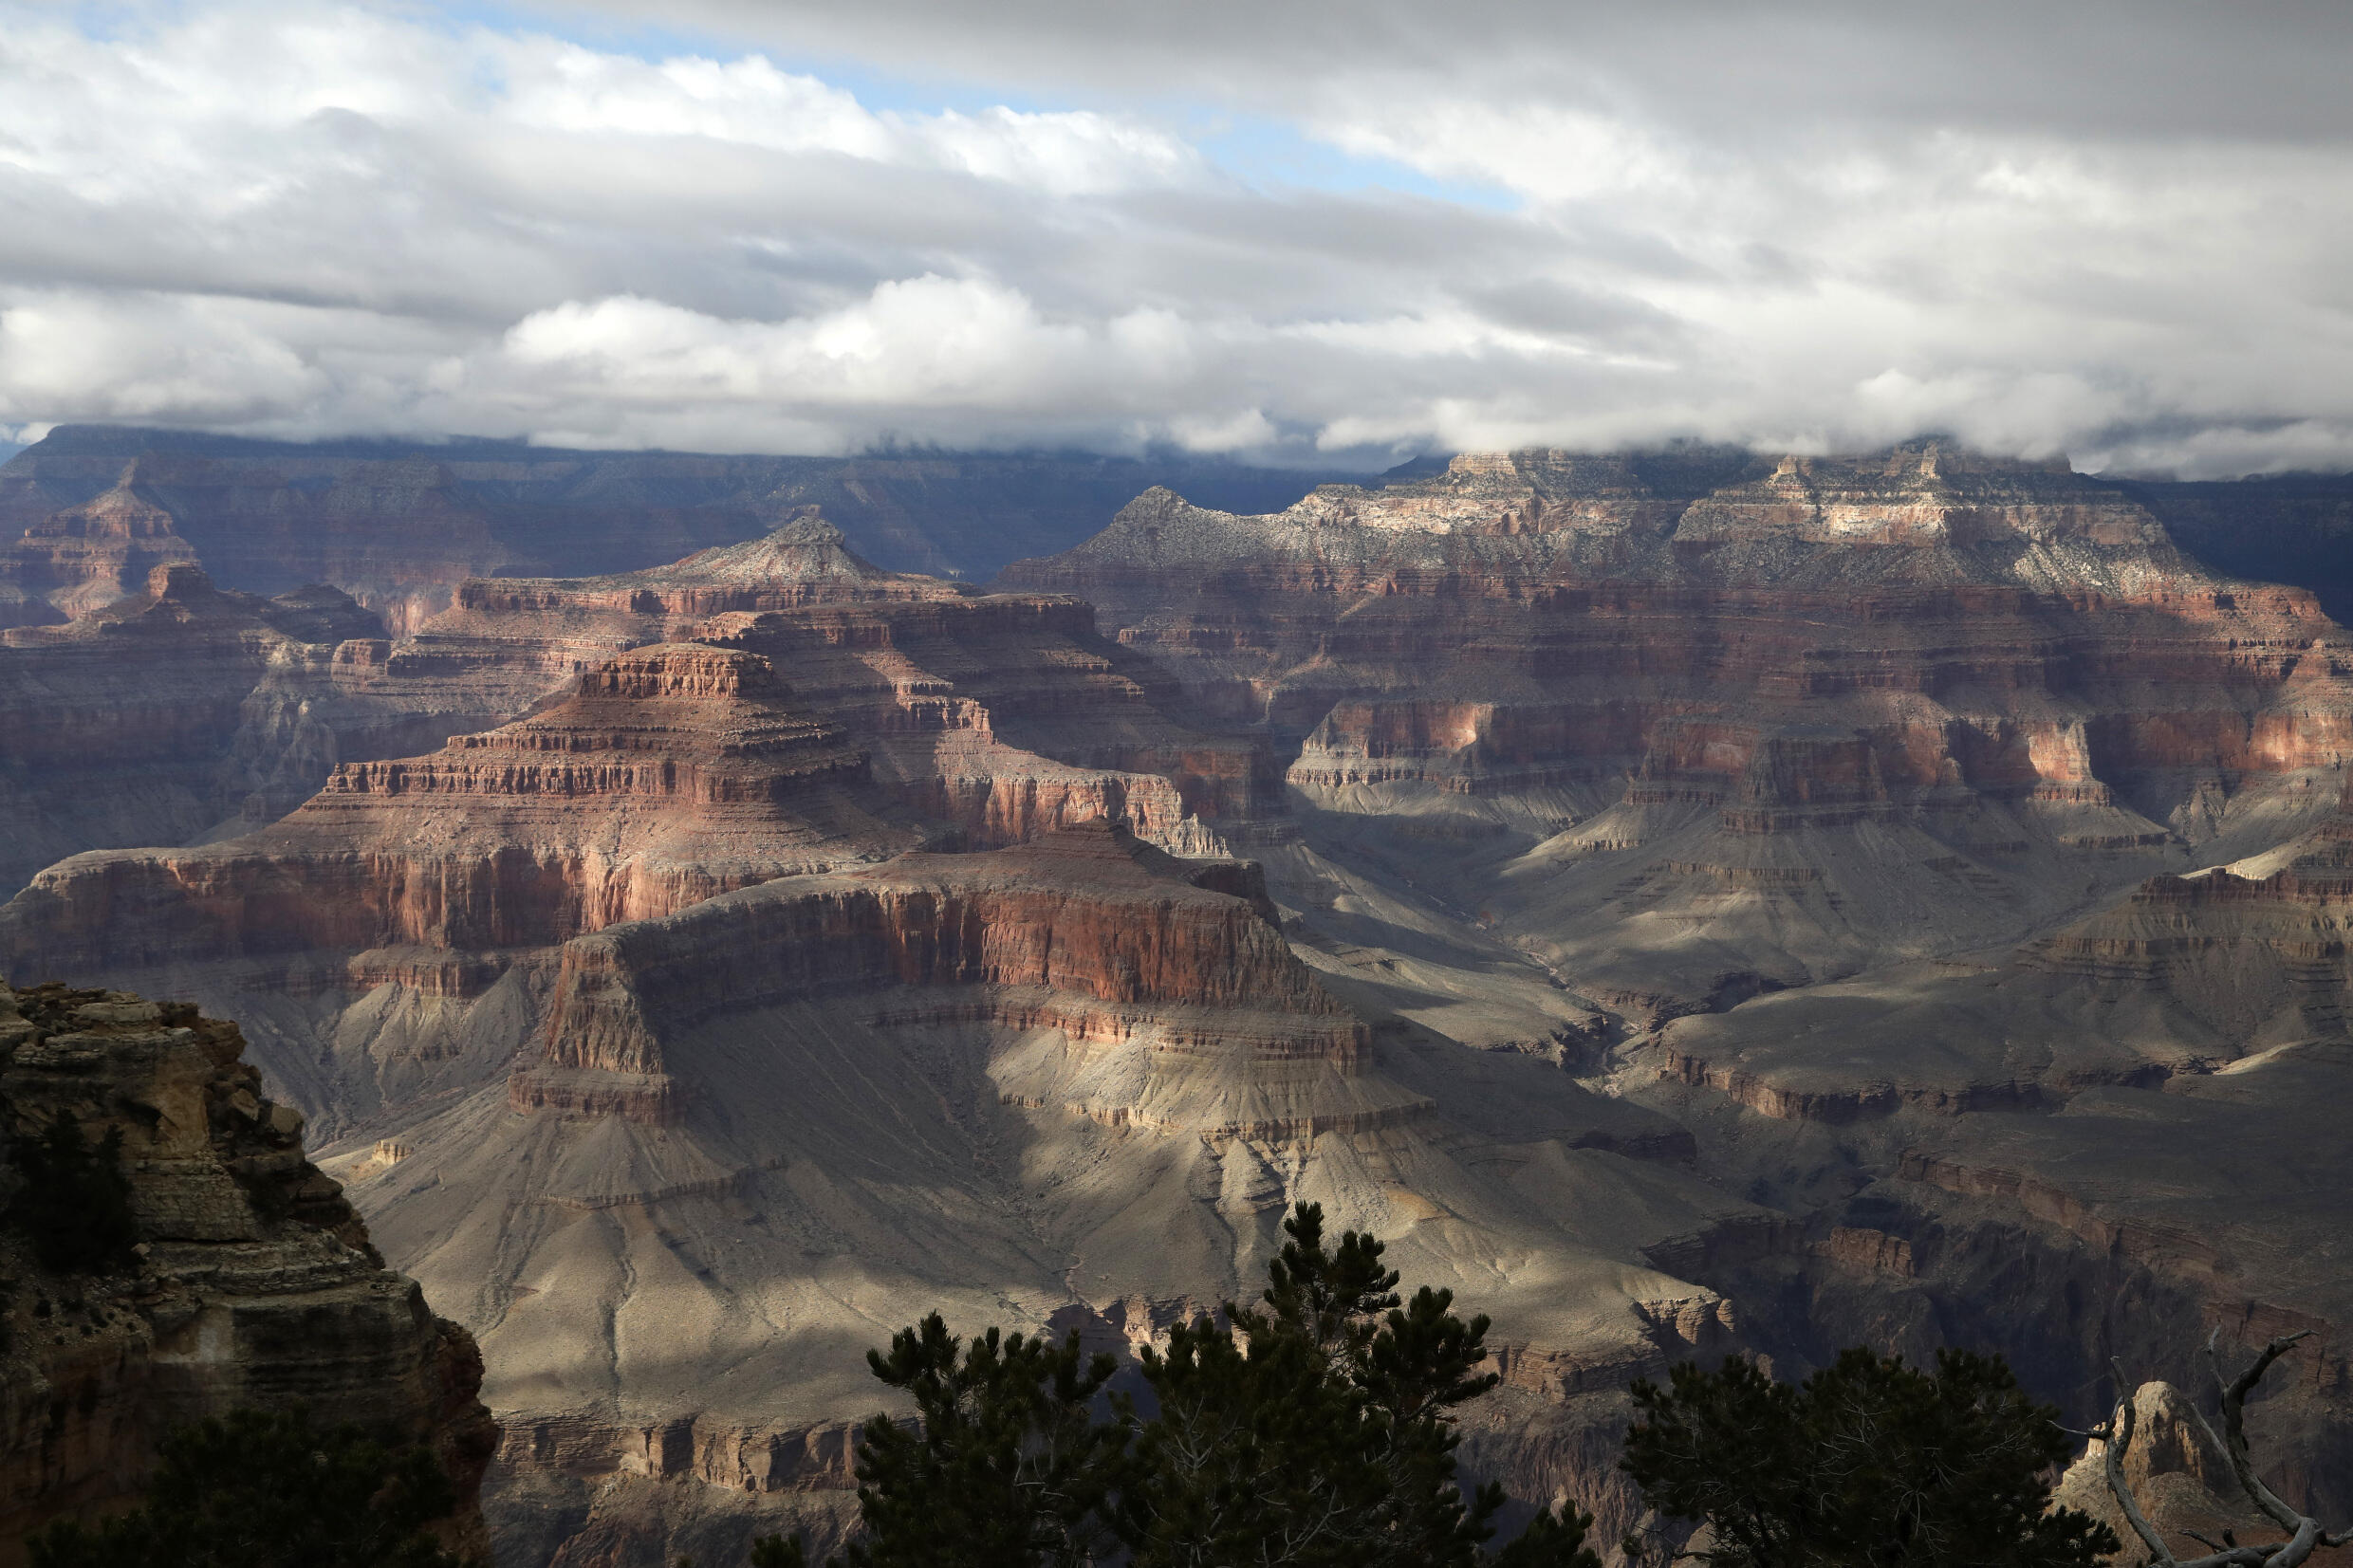 The South Rim of the Grand Canyon offers a spectacular view - and a backdrop for US President Joe Biden as he announces a new nearby national monument